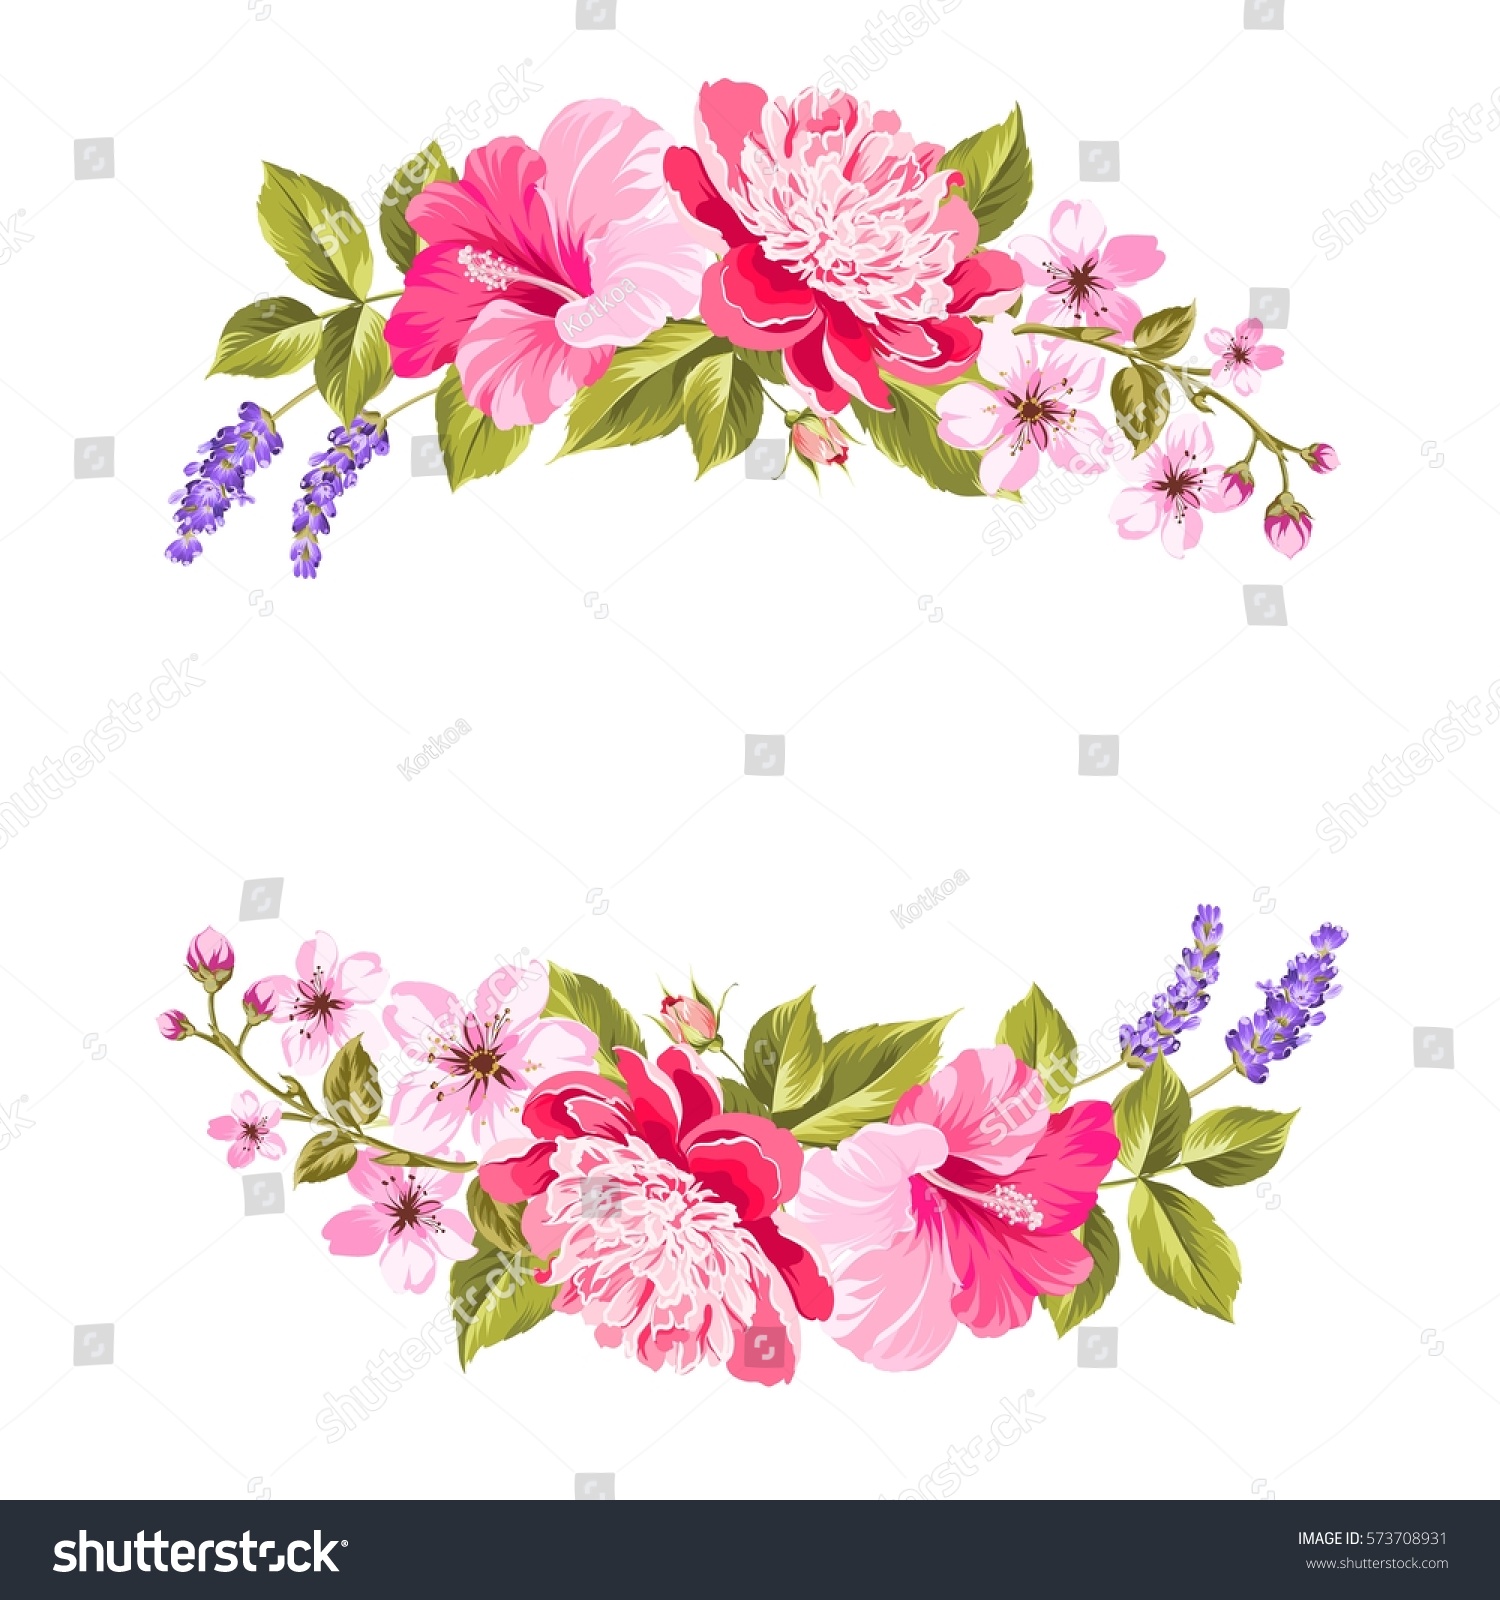 Download Tropical Flower Garland Free Copy Space Stock Vector ...